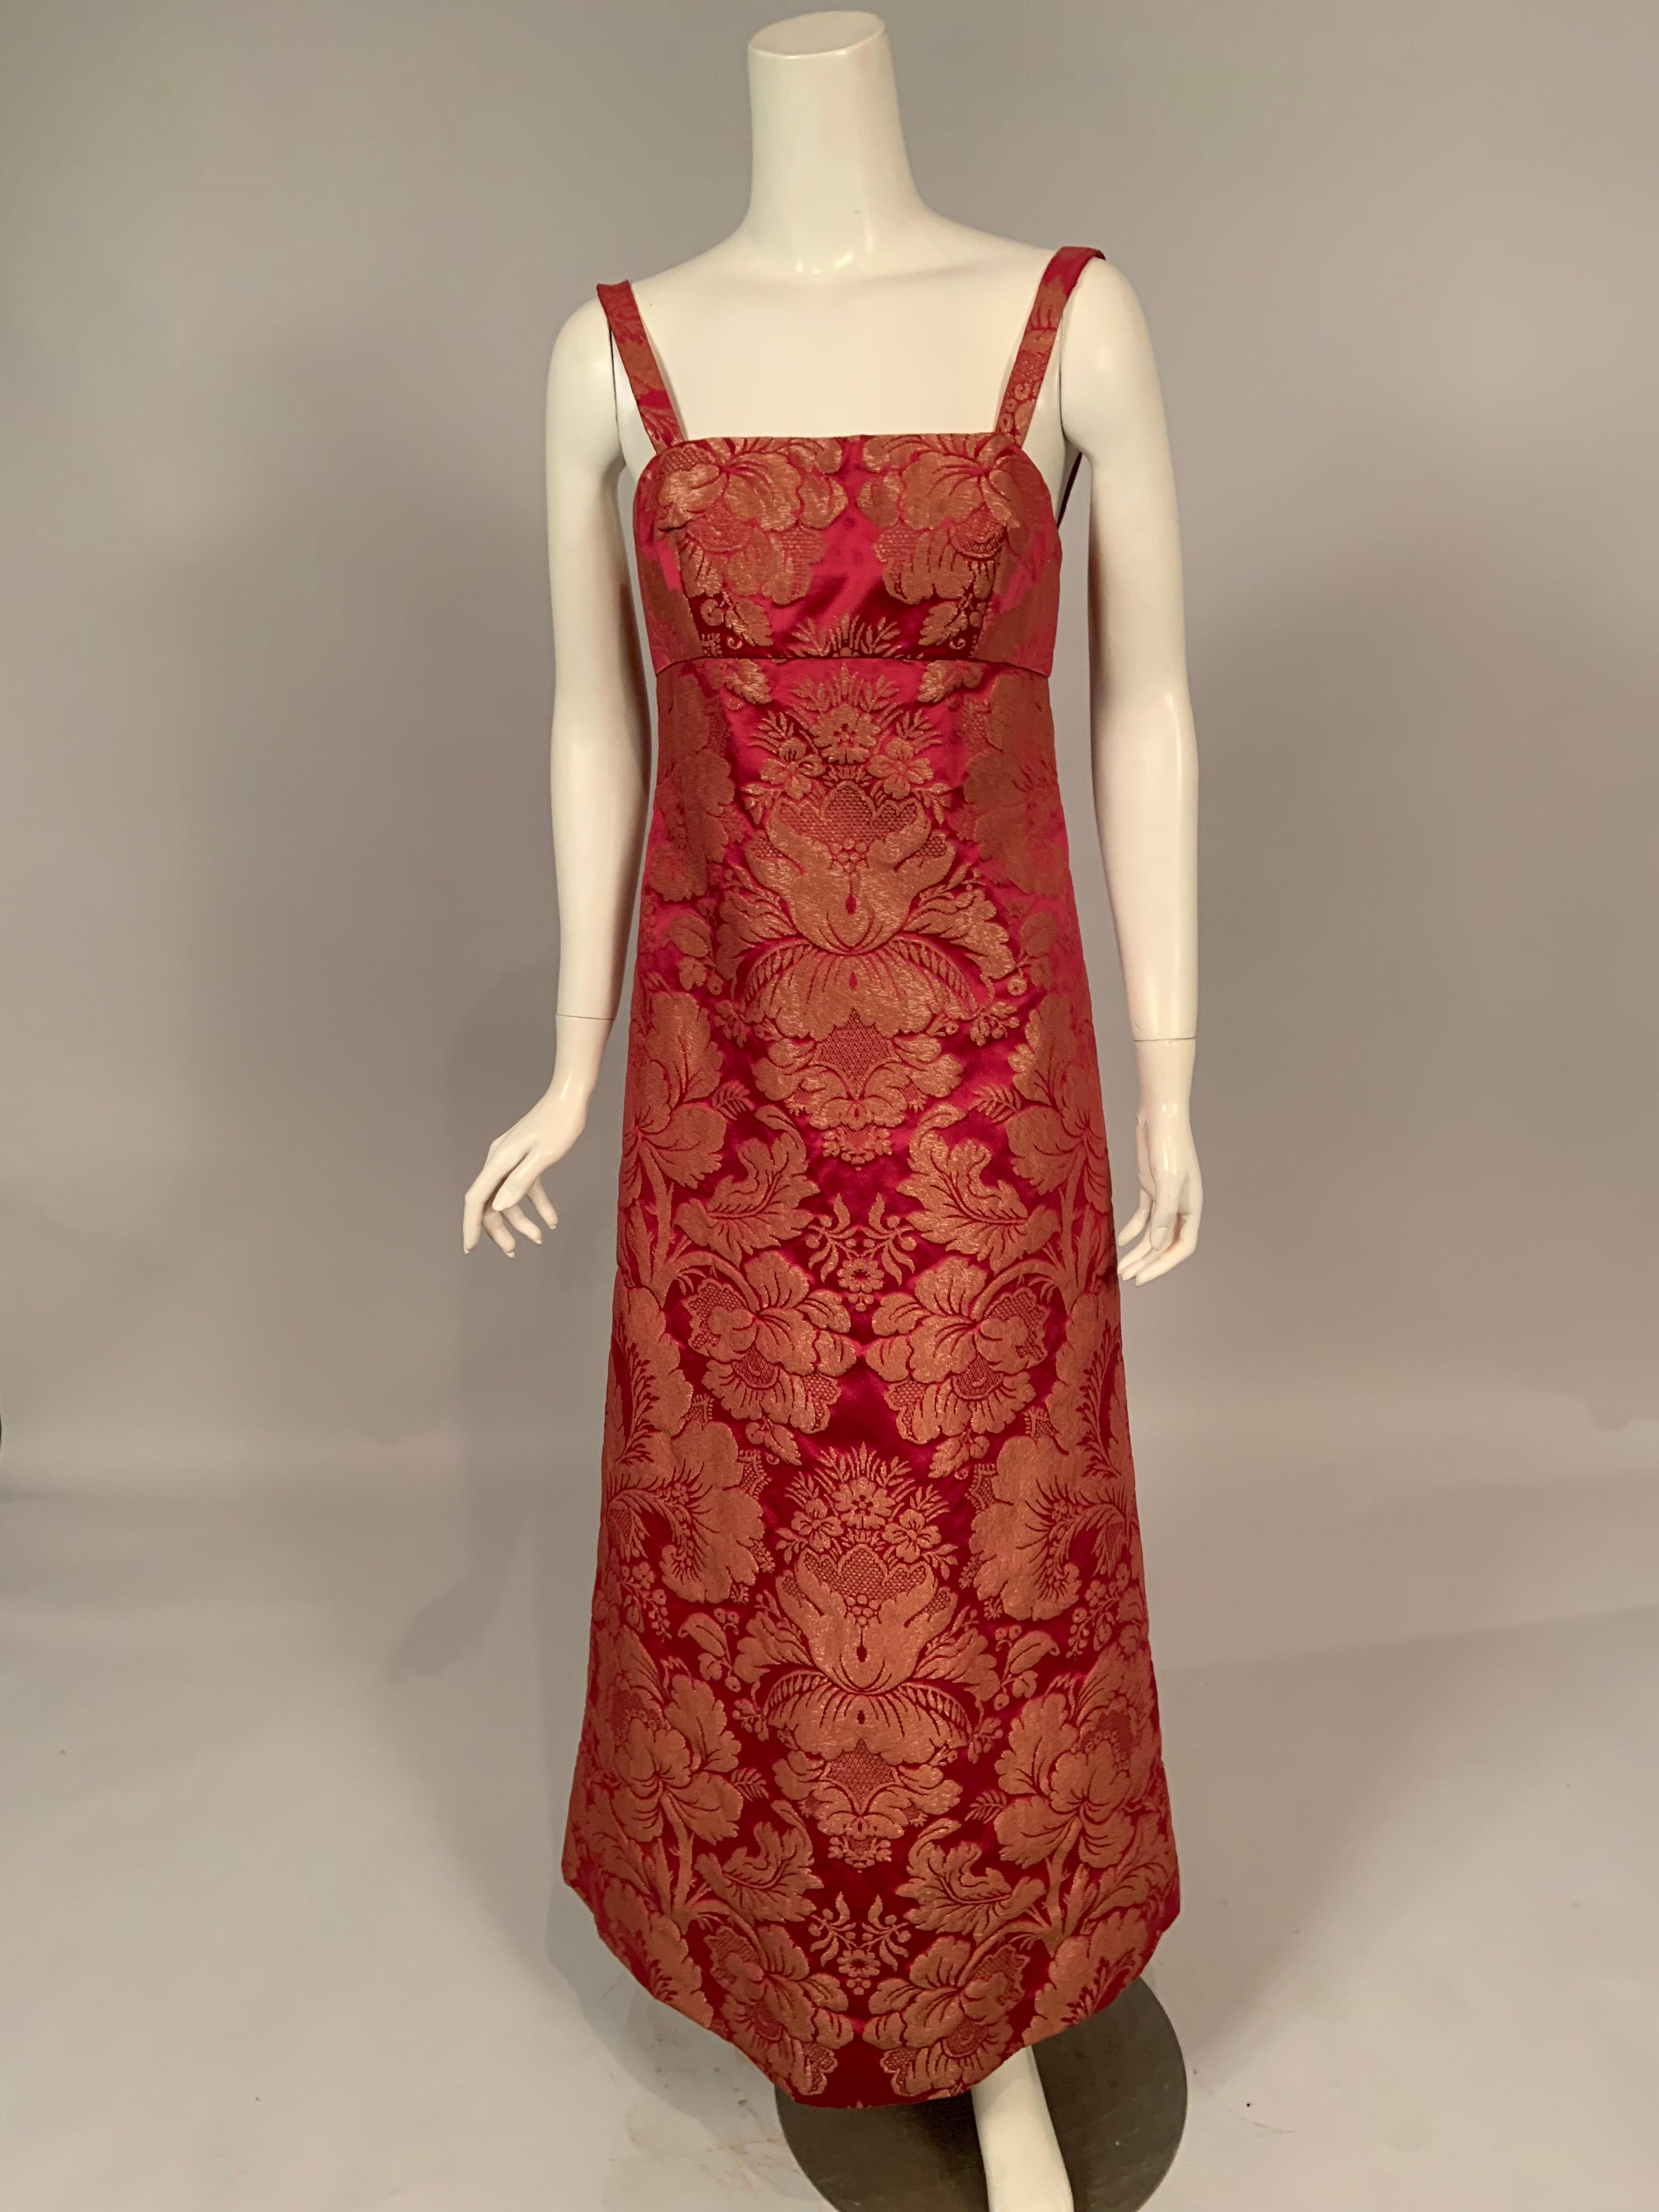 Helena Barbieri used a beautiful raspberry red silk with a woven metallic gold floral design for this chic 1960's dress and coat set. The dress has narrow straps an empire waistline and an elongated A line skirt. The boned bodice has a double zipper